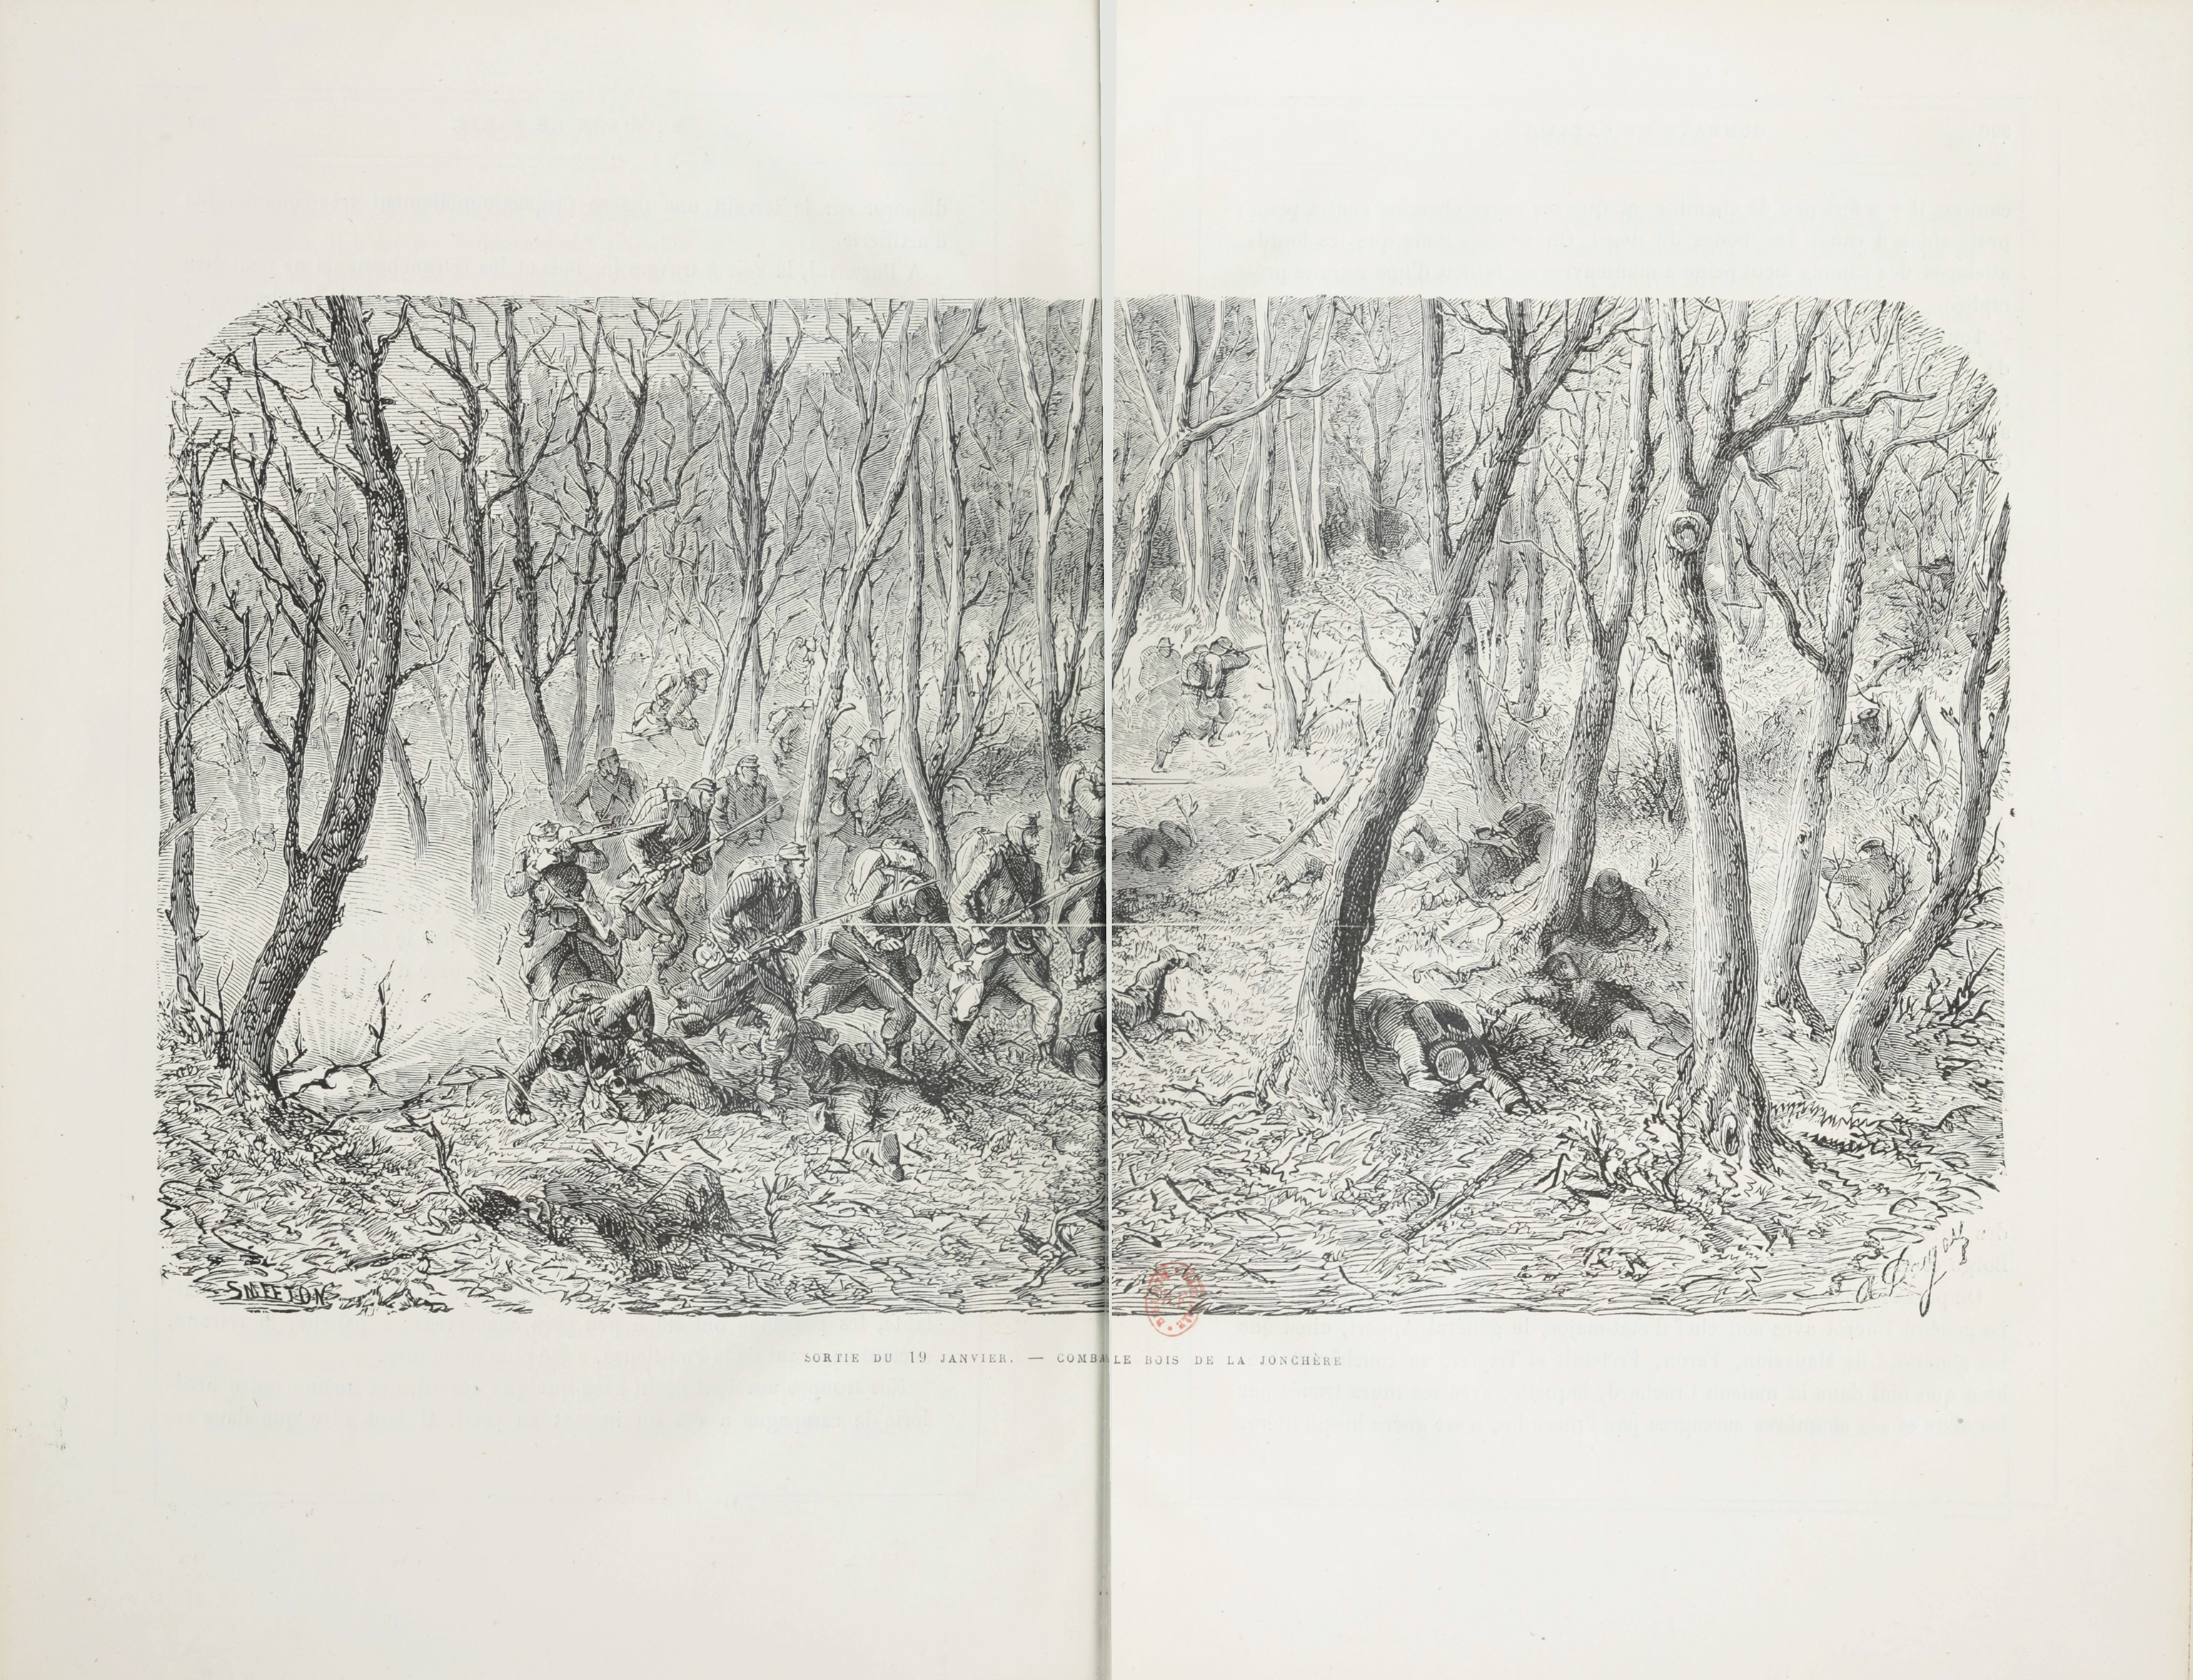 A photograph of a black and white print, a group of soldiers firing rifles in a battle in a forest. Some figures lay dead against the leafless trees that surrounded them.